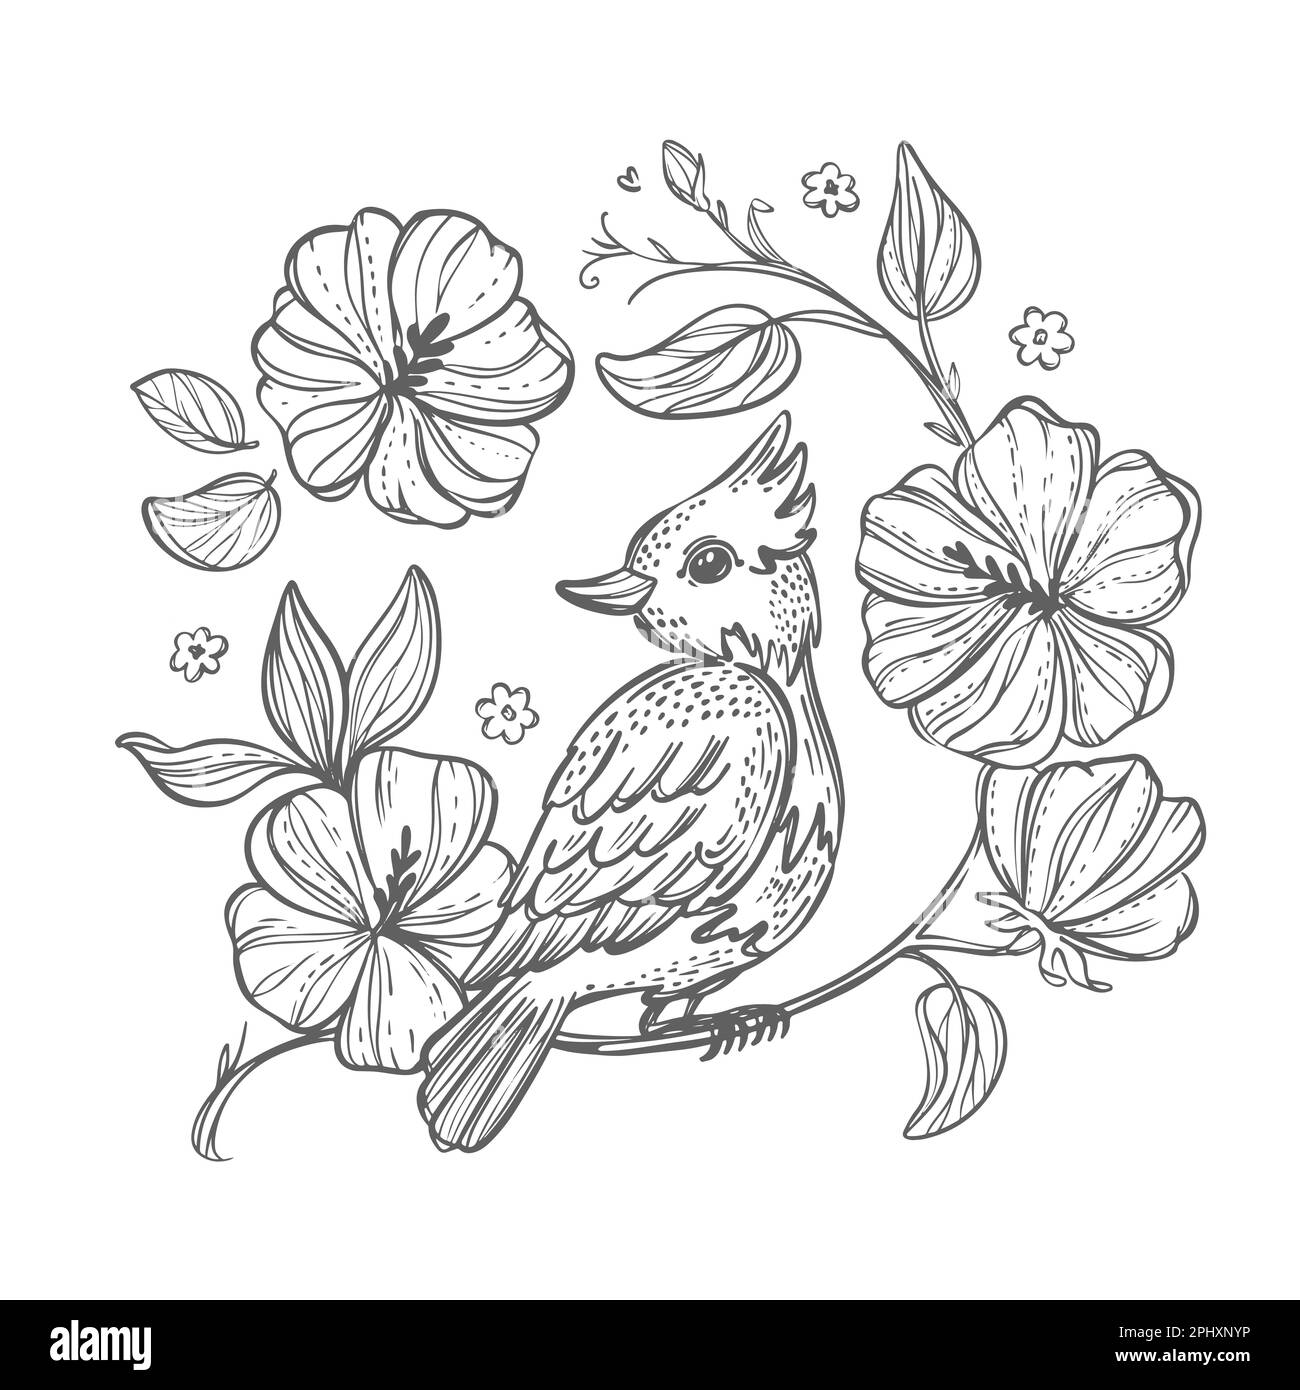 BIRD HAND DRAWN Sits On A Branch With Blooming Flowers Monochrome Hand Drawn Sketch In Chinese Style Coloring Page Nature Vector Illustration For Prin Stock Vector